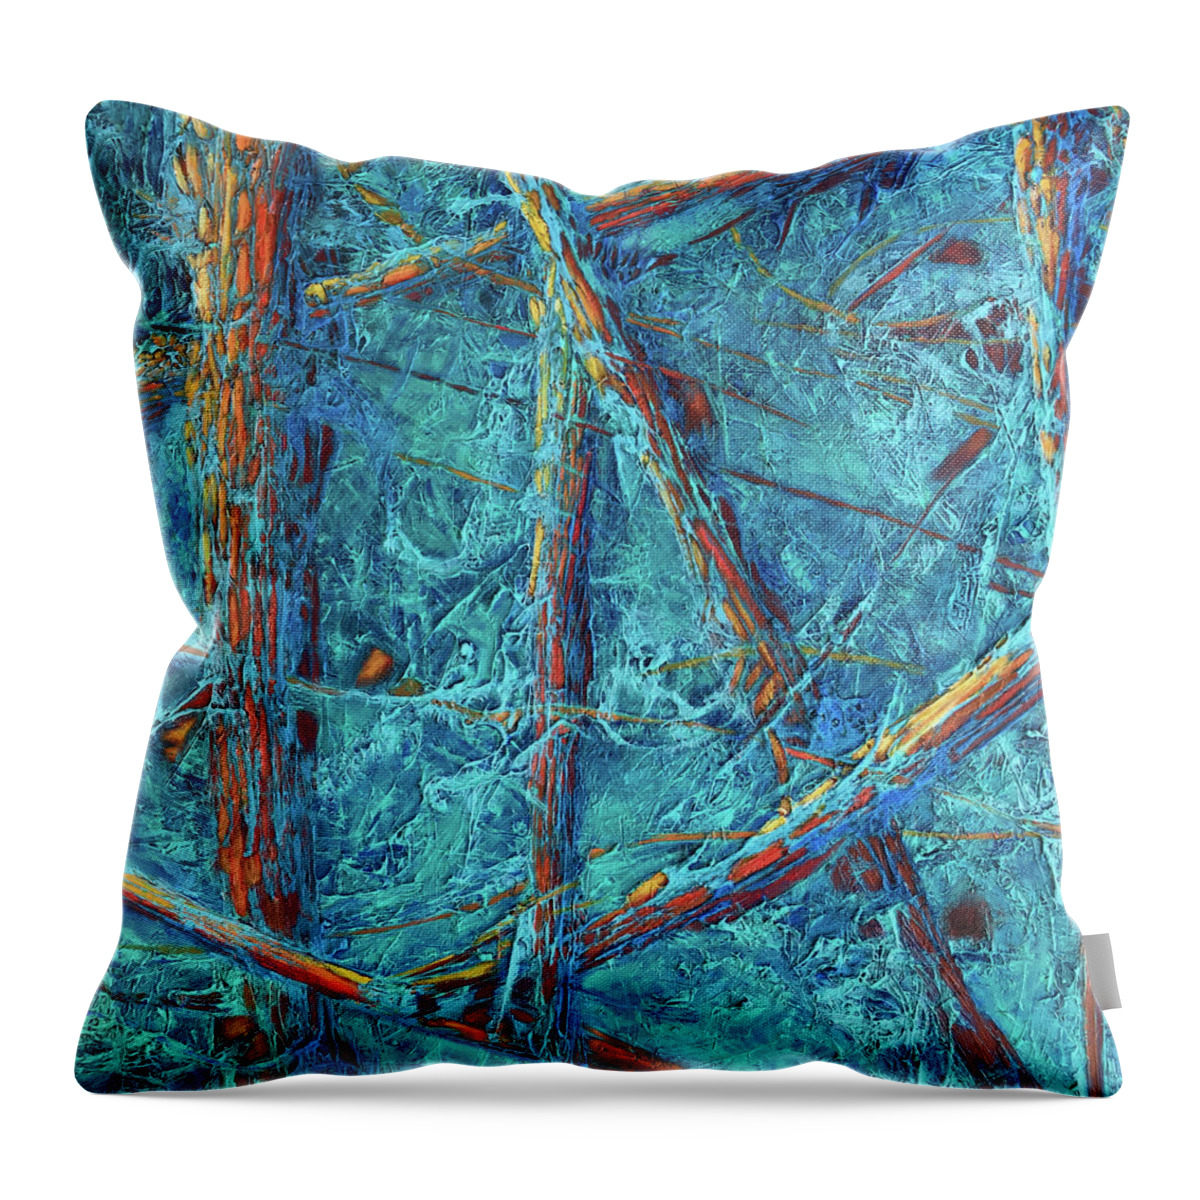 Abstract Throw Pillow featuring the painting Drift 1 by Deborah Ann Good